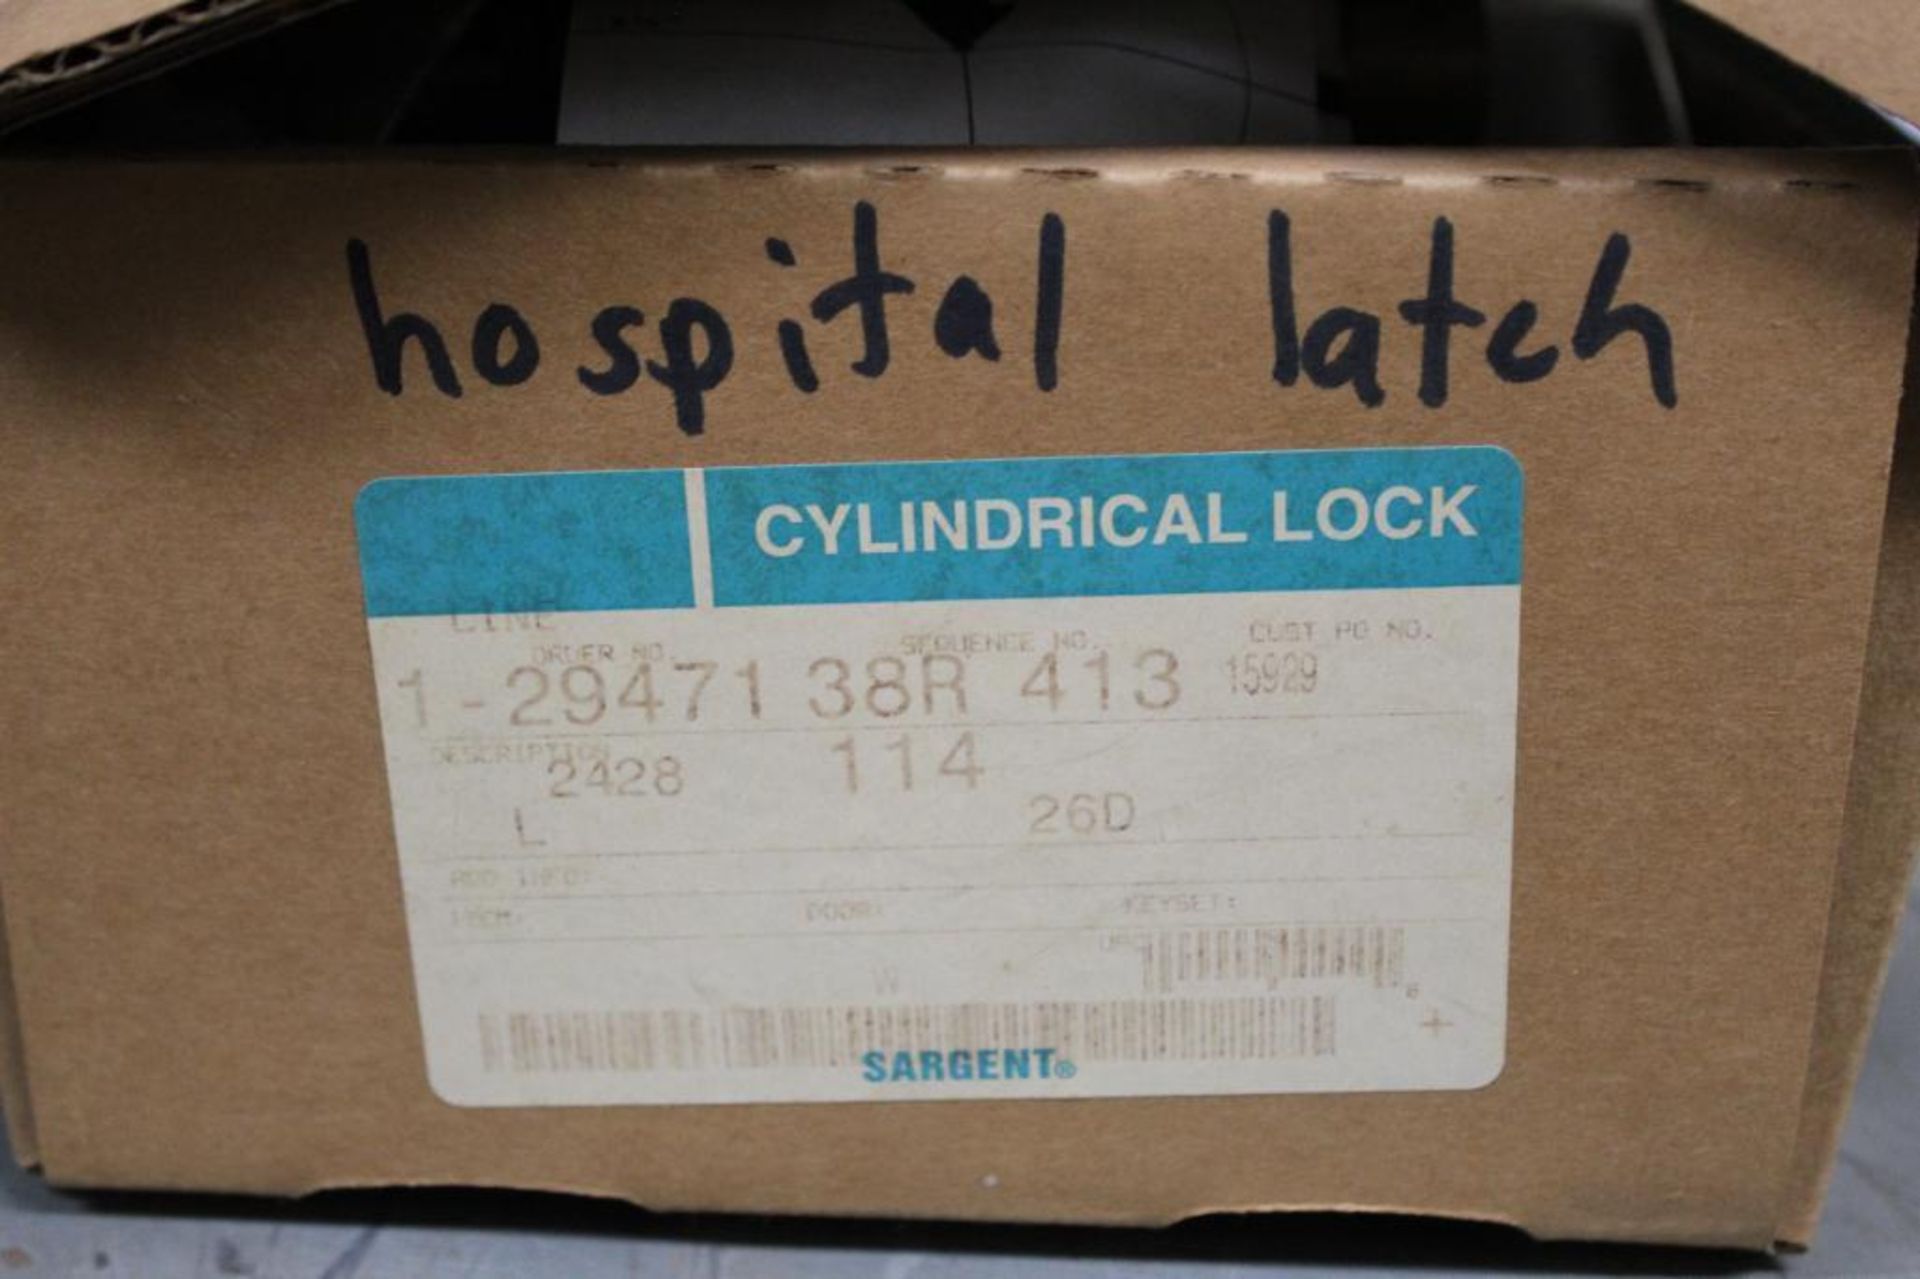 Lot of (7) Sargent Cylindrical and Bored Lock Hospital Latches Model: 114-2428R-26D - Image 8 of 9